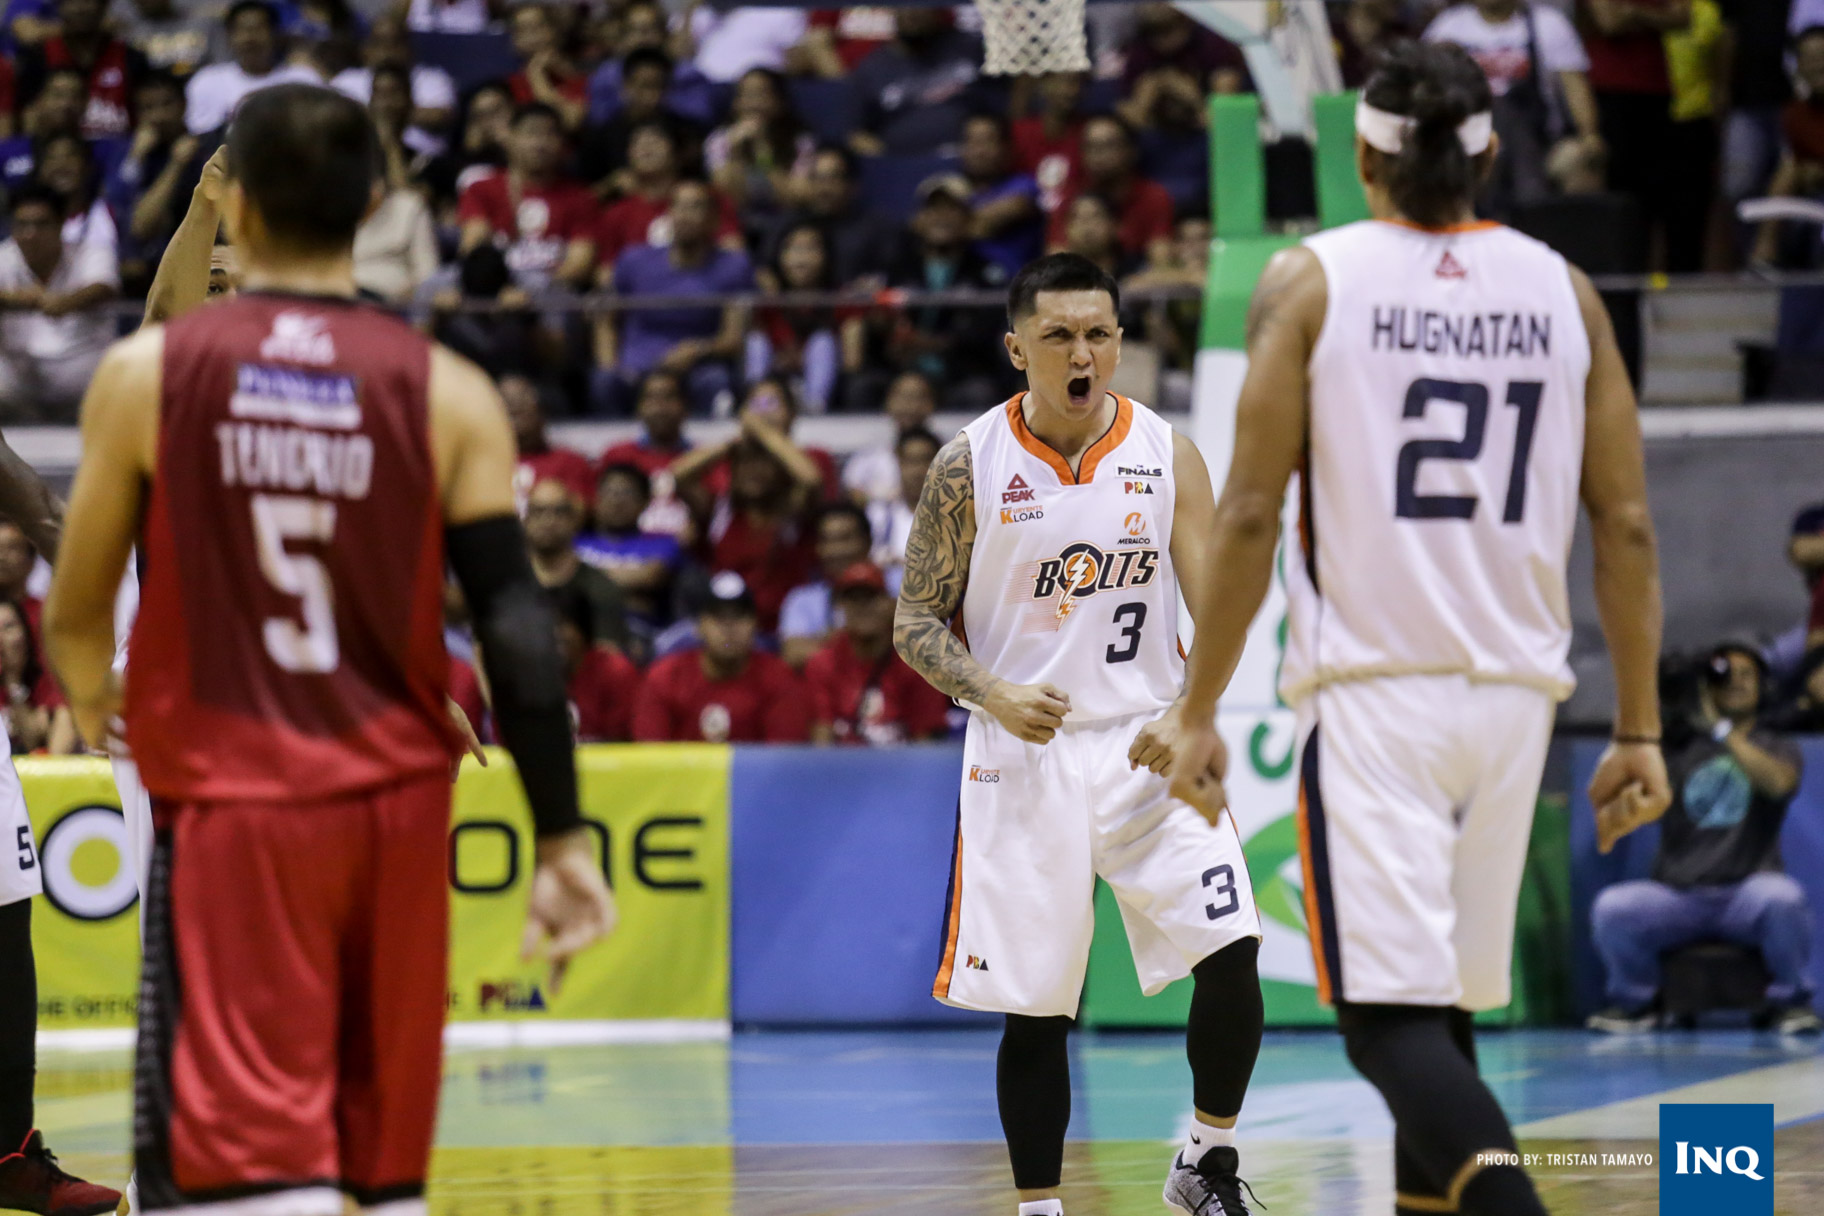 Jimmy Alapag celebrates. Photo by Tristan Tamayo/INQUIRER.net